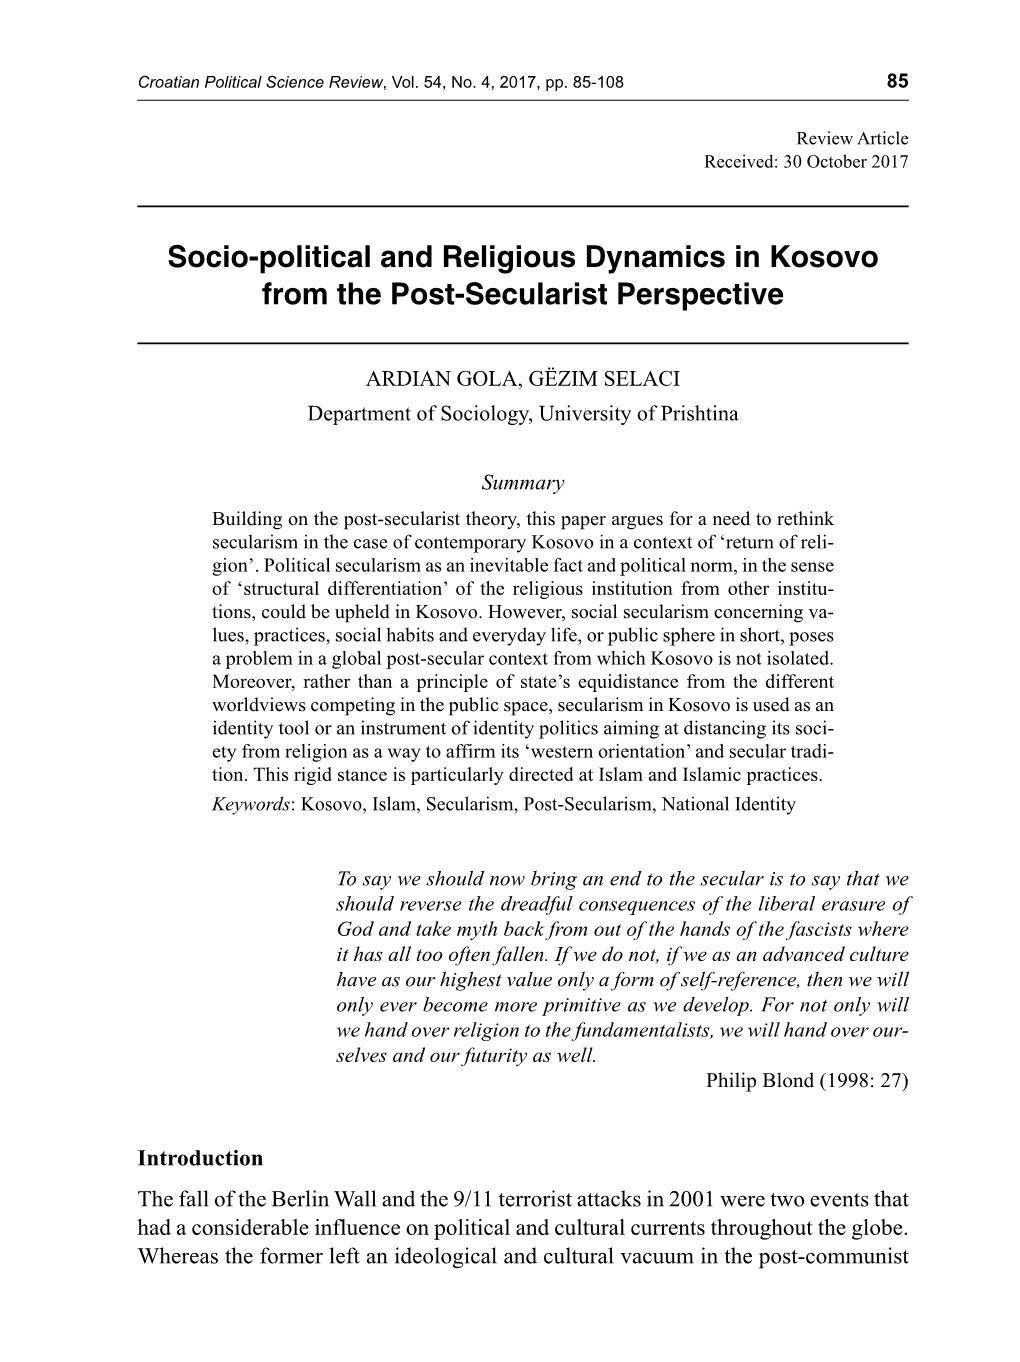 Socio-Political and Religious Dynamics in Kosovo from the Post-Secularist Perspective